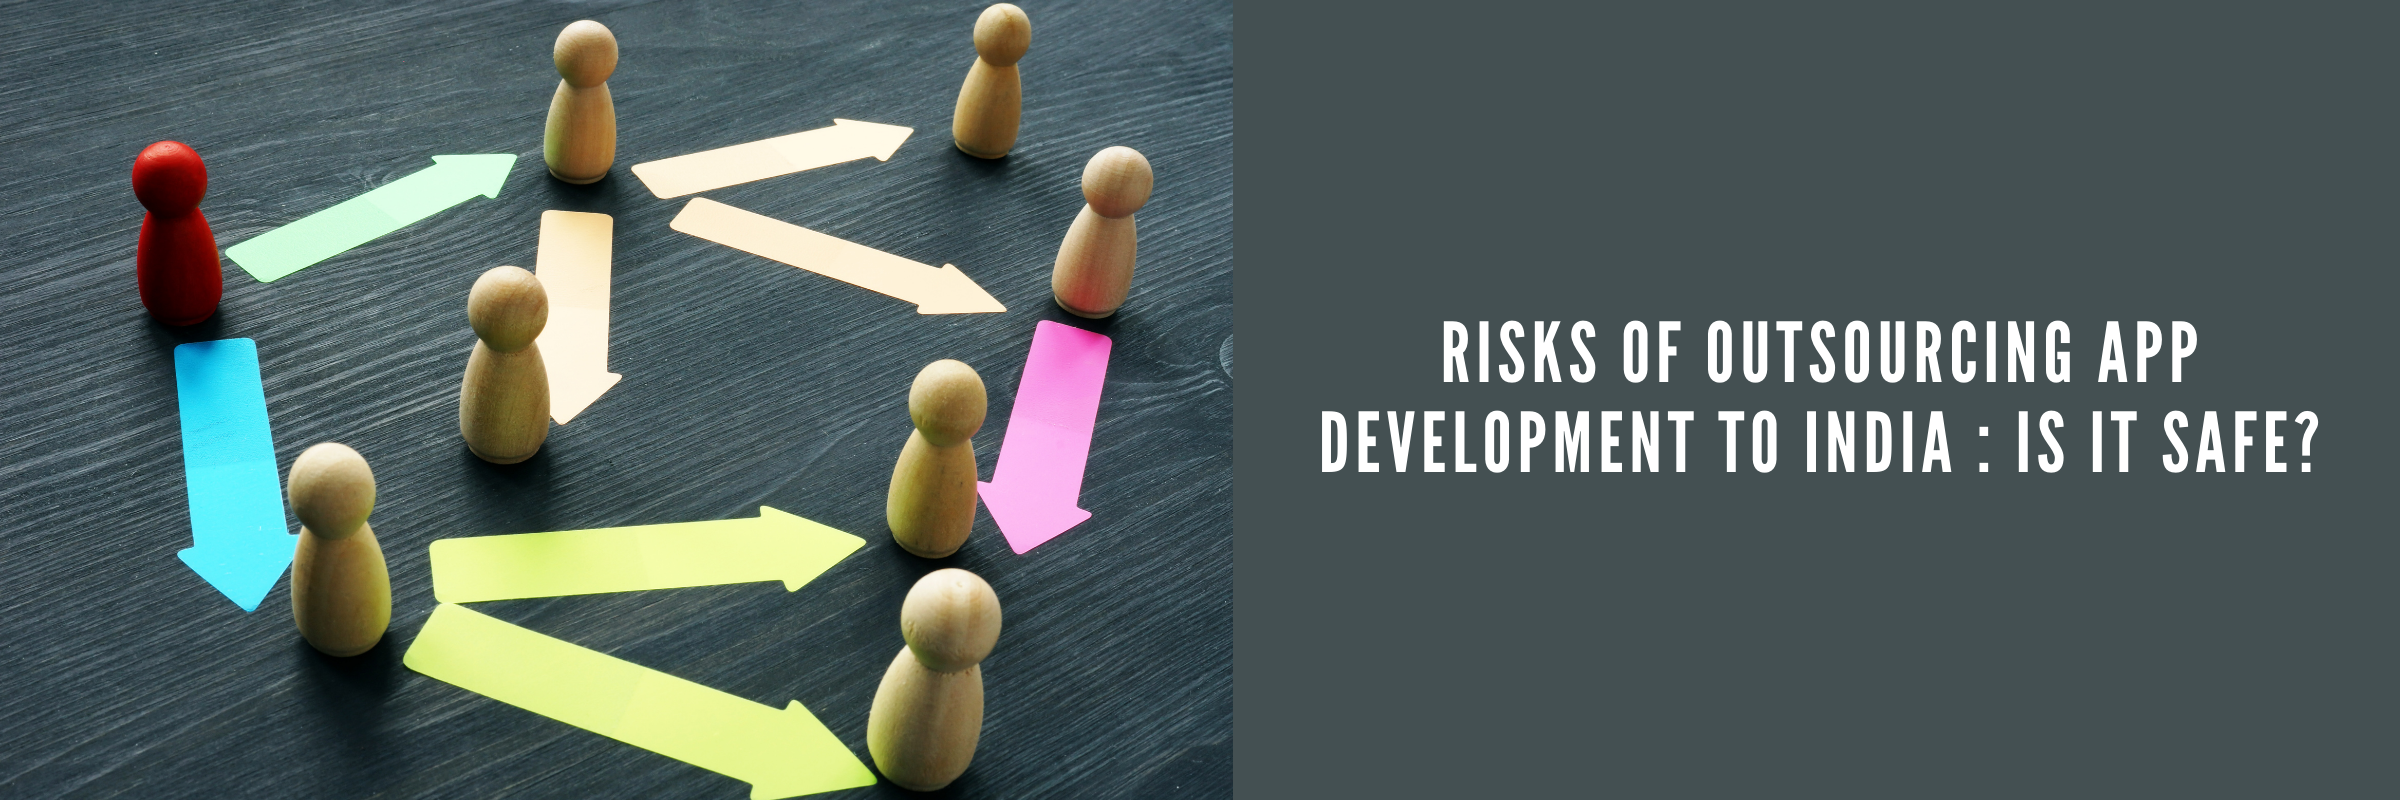 Risks of outsourcing app development to India: Is it safe?